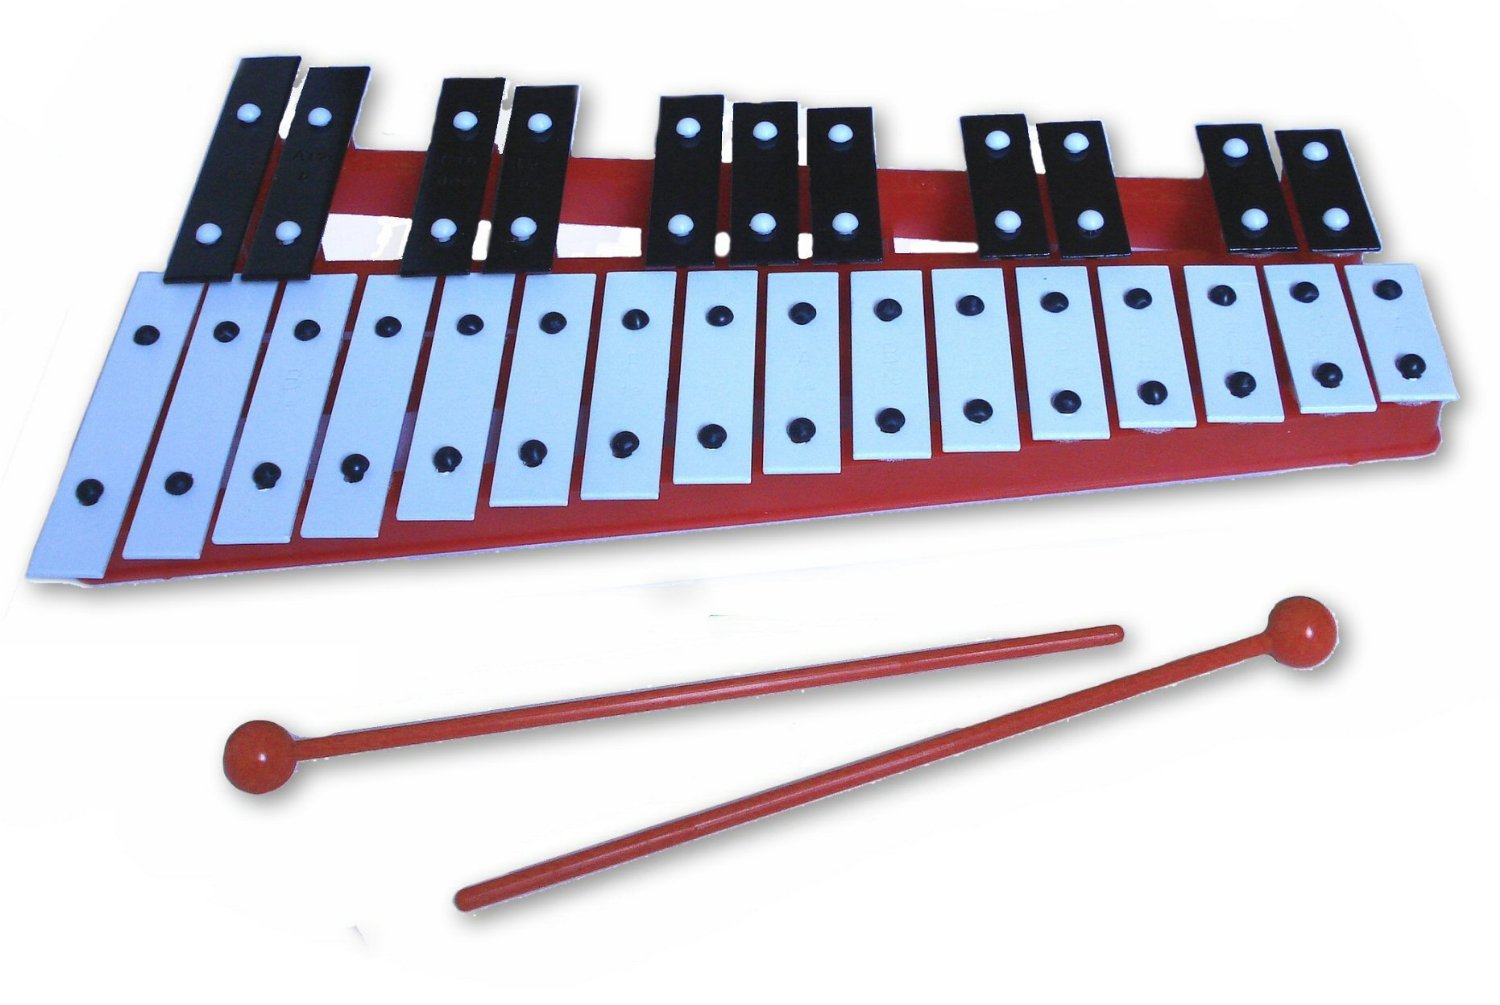 Picture Of A Xylophone - ClipArt Best